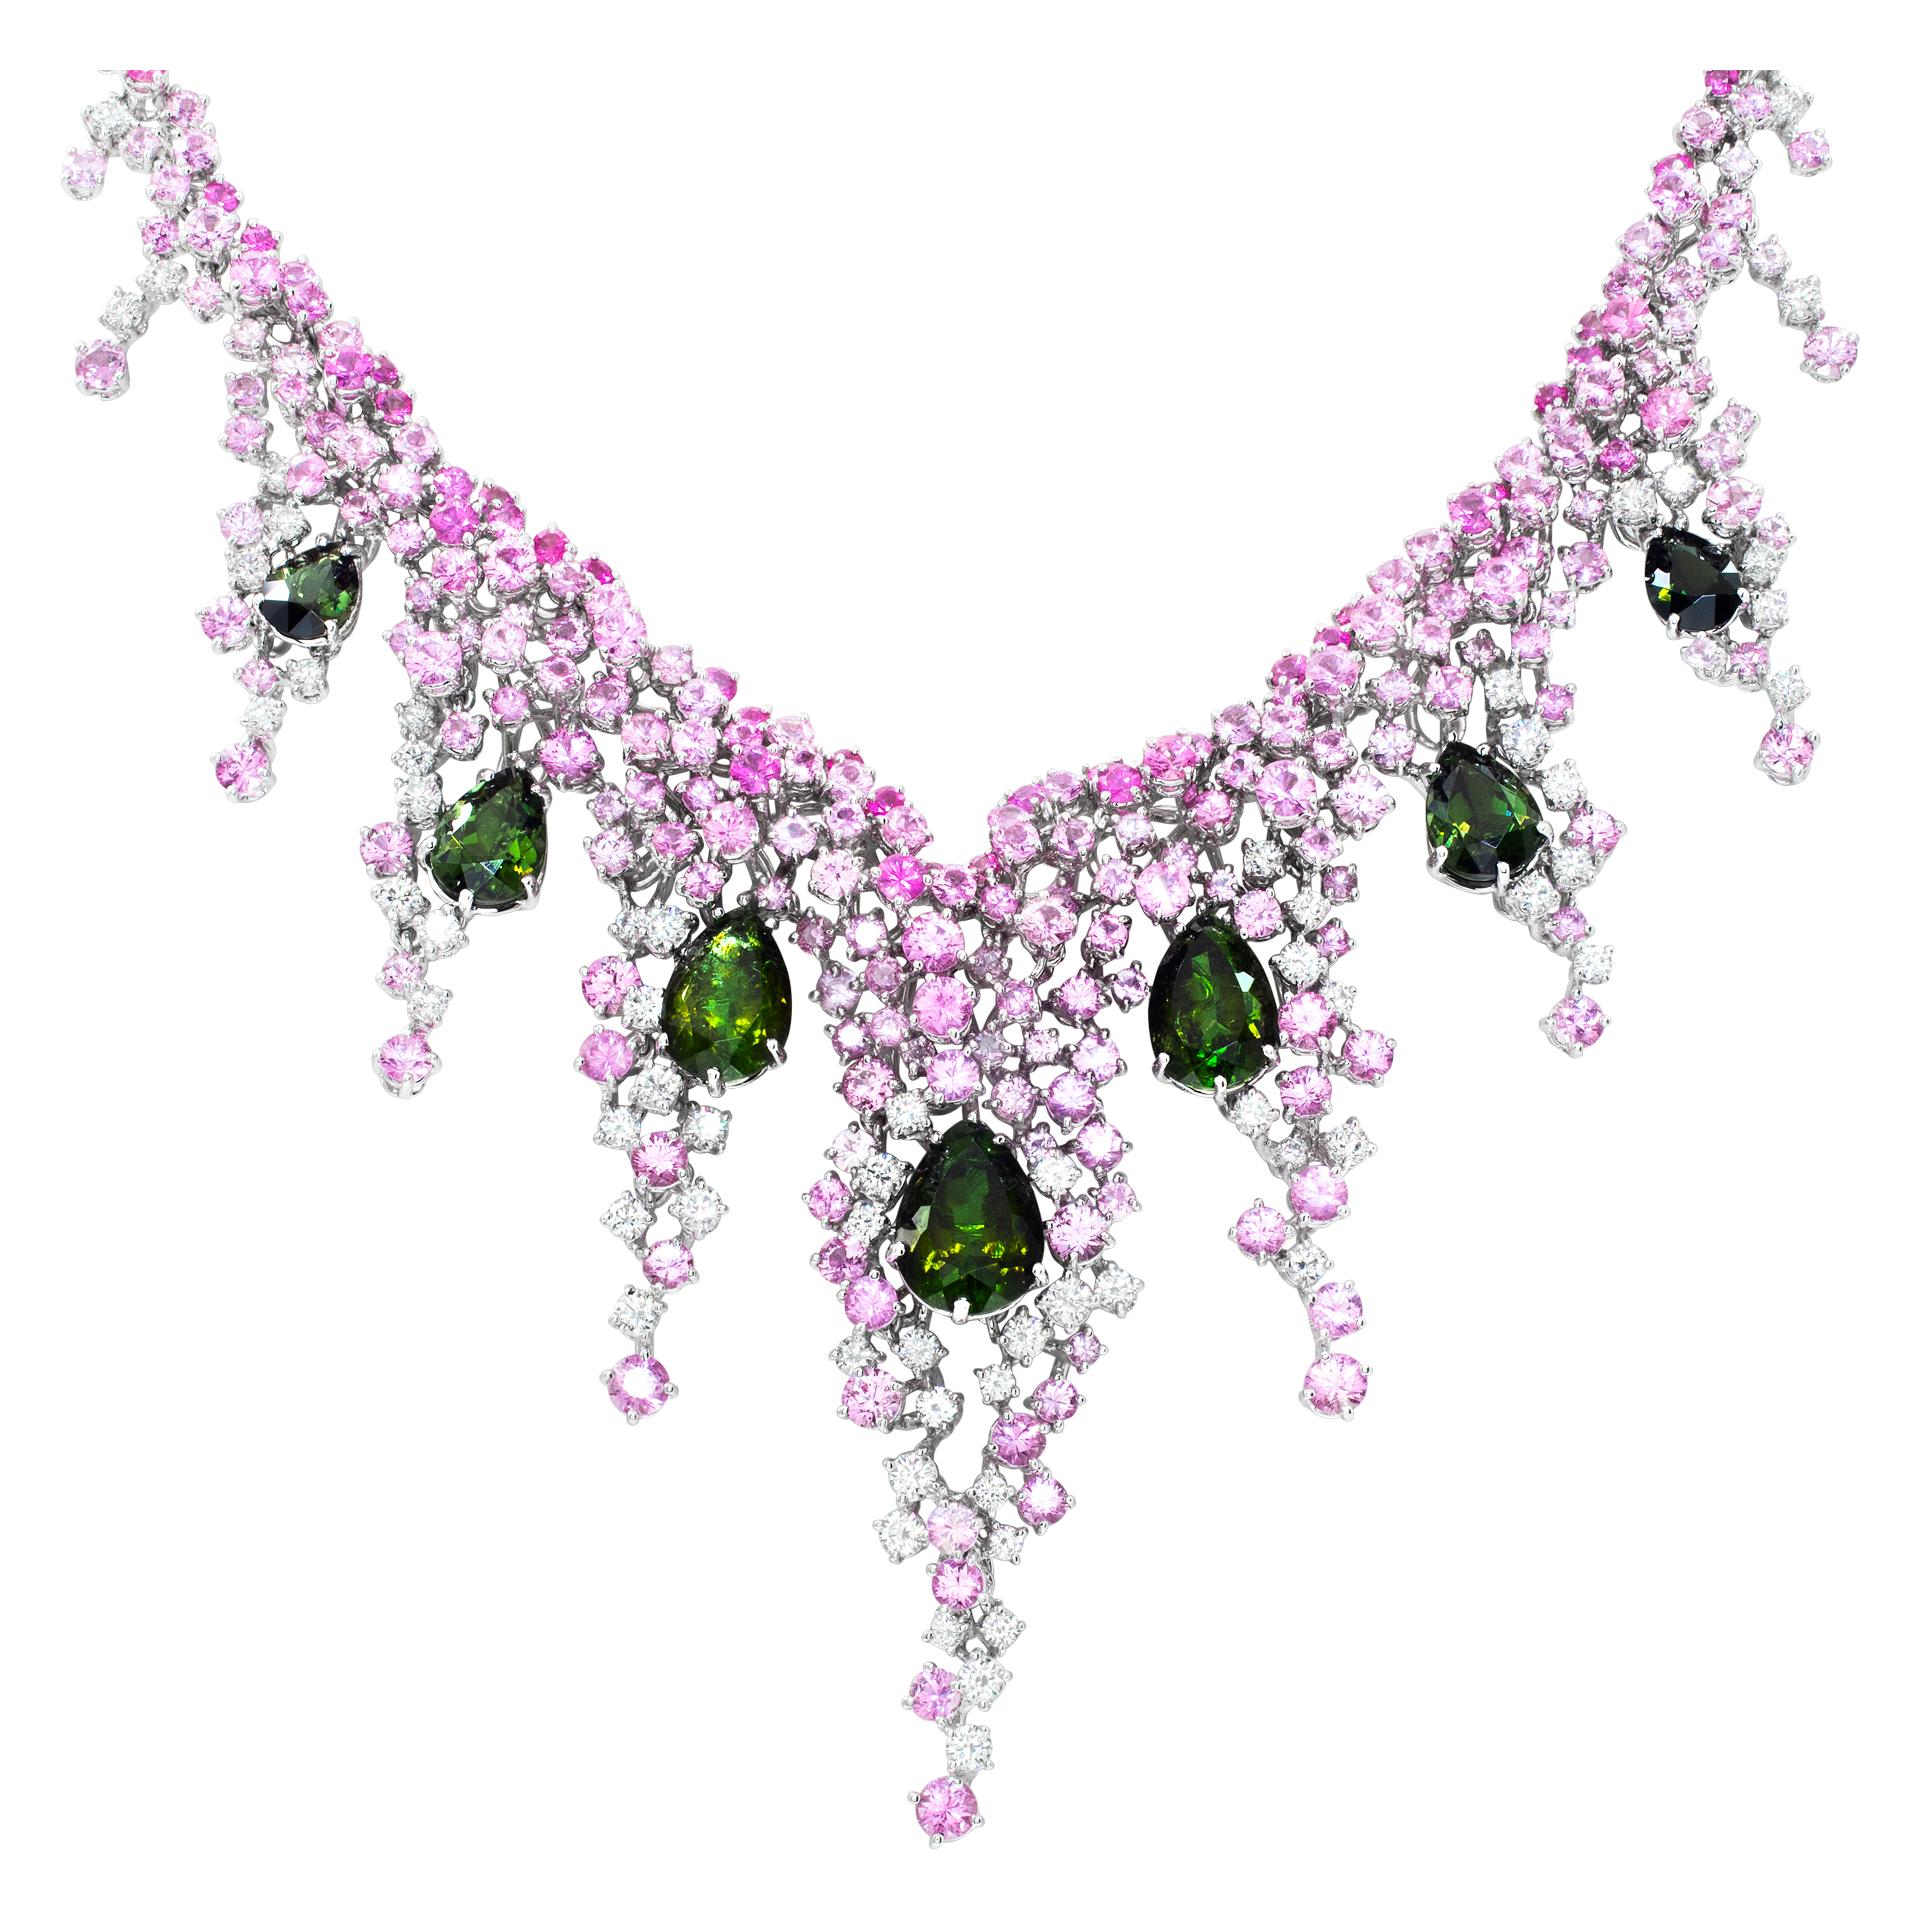 Damiani pink sapphire, tourmaline and diamond necklace in 18k white gold, with approximately over 12 carats in pink sapphires, over 12 carats in green tourmaline and 4.50 carats in D-F color, VVS-VS clarity diamonds. Damiani High Jewelry Mimosa